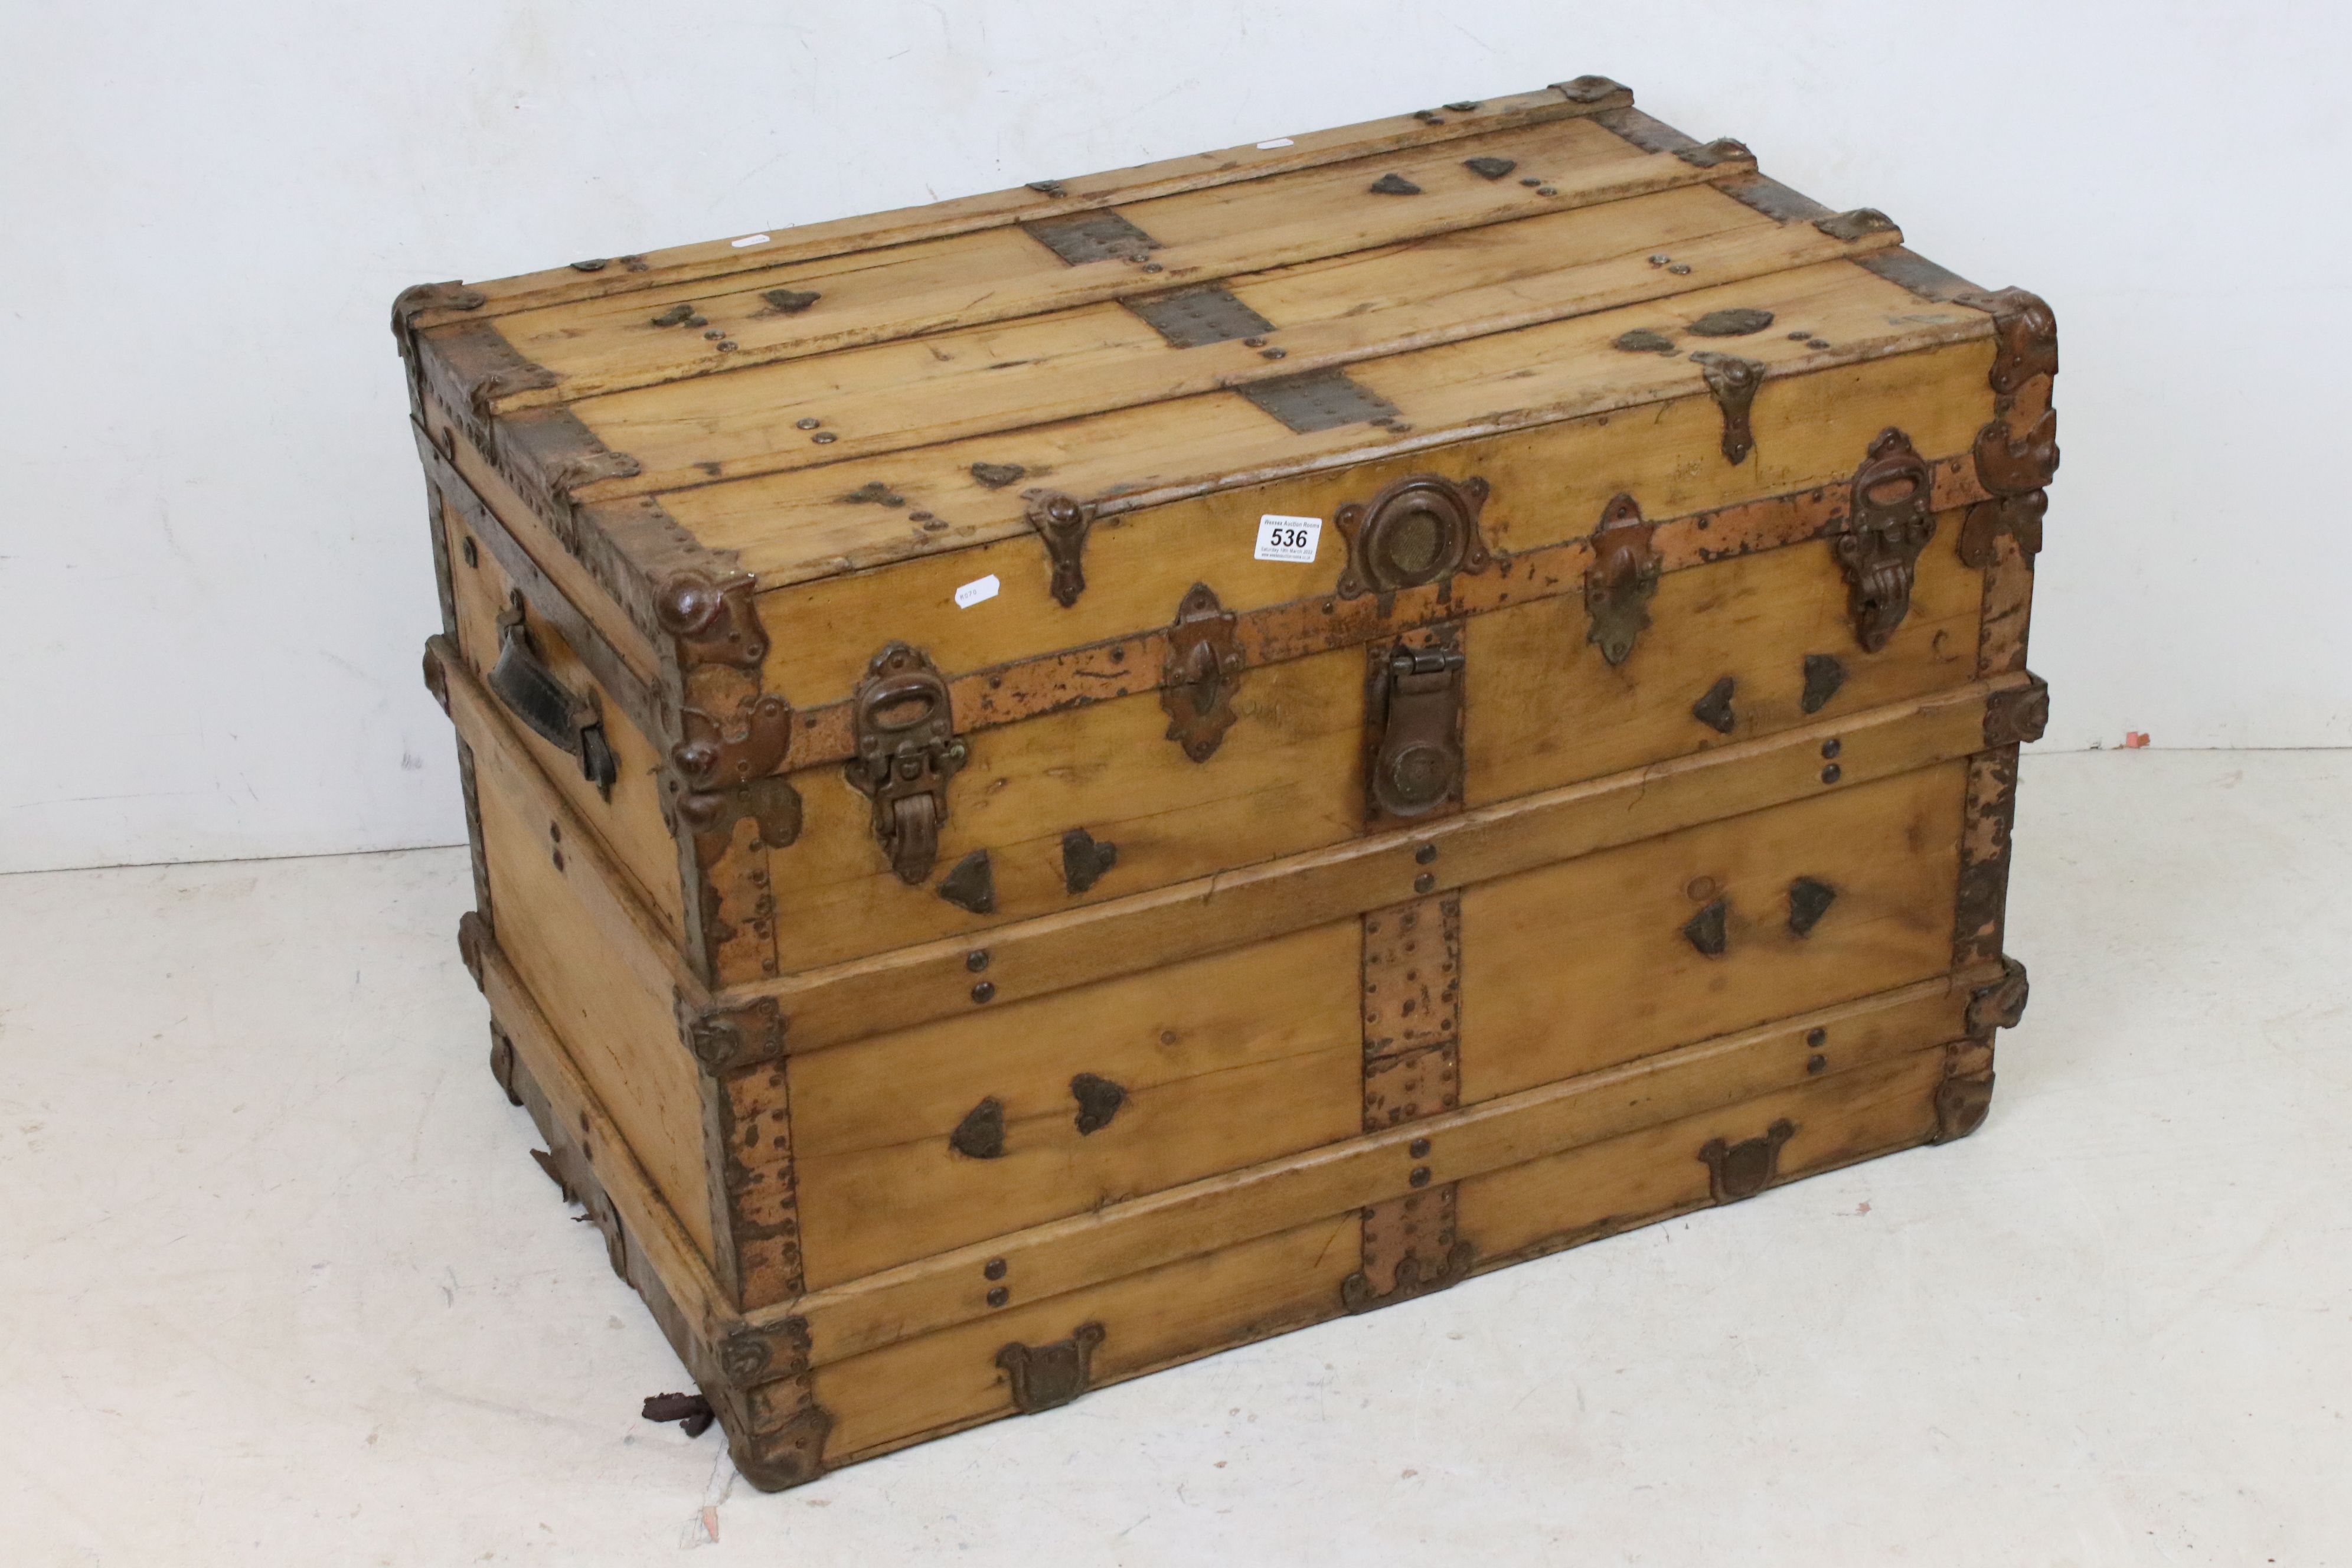 19th century Pine and Studded Travelling Trunk / Box with leather carrying handles, 87cm wide x 58cm